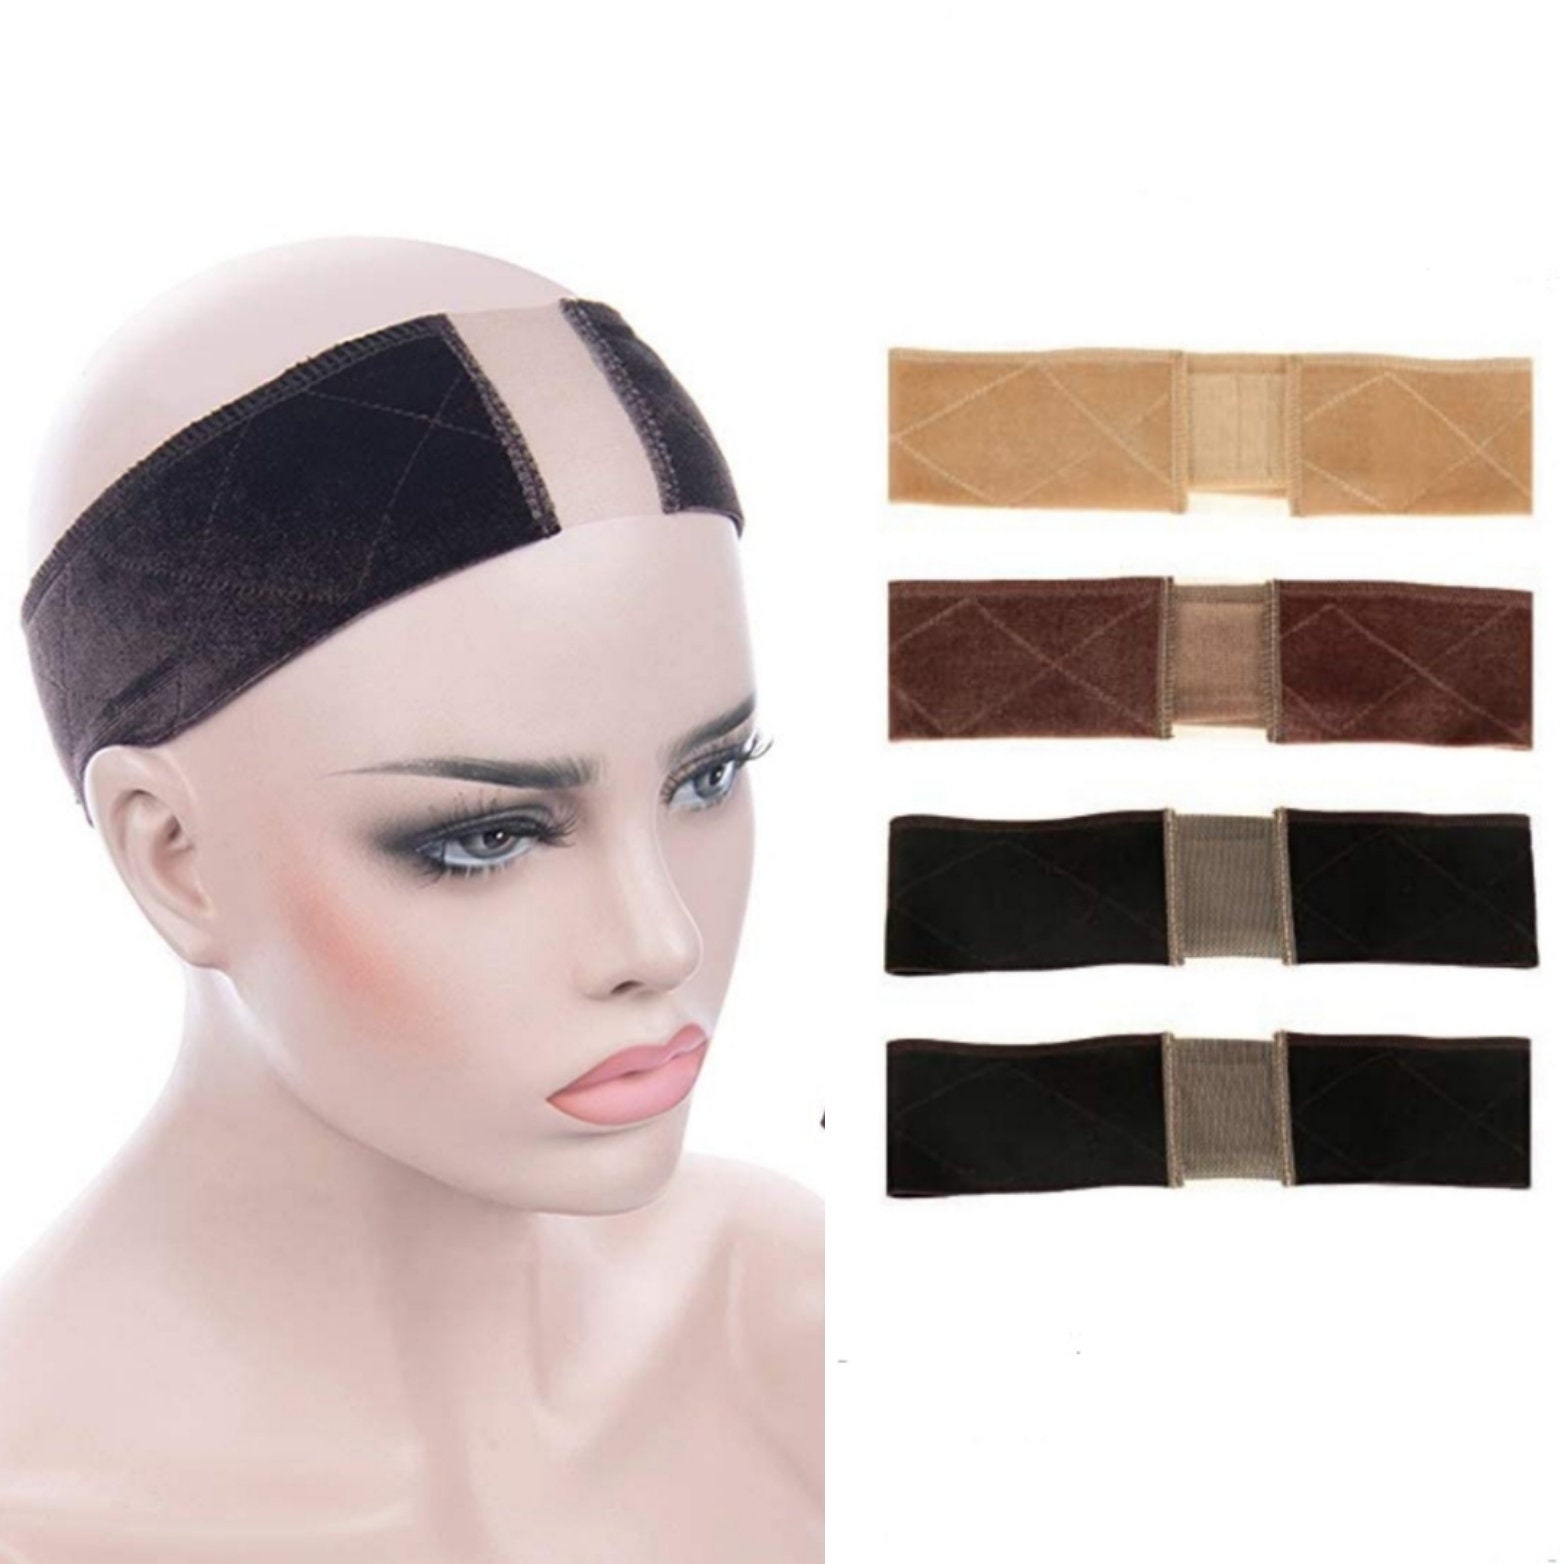 Removable Wig Strap Band Fix Band For Wig Adjustable Elastic Band For Wigs  Knit Elastic Band For Wigs With Adjustable Buckle